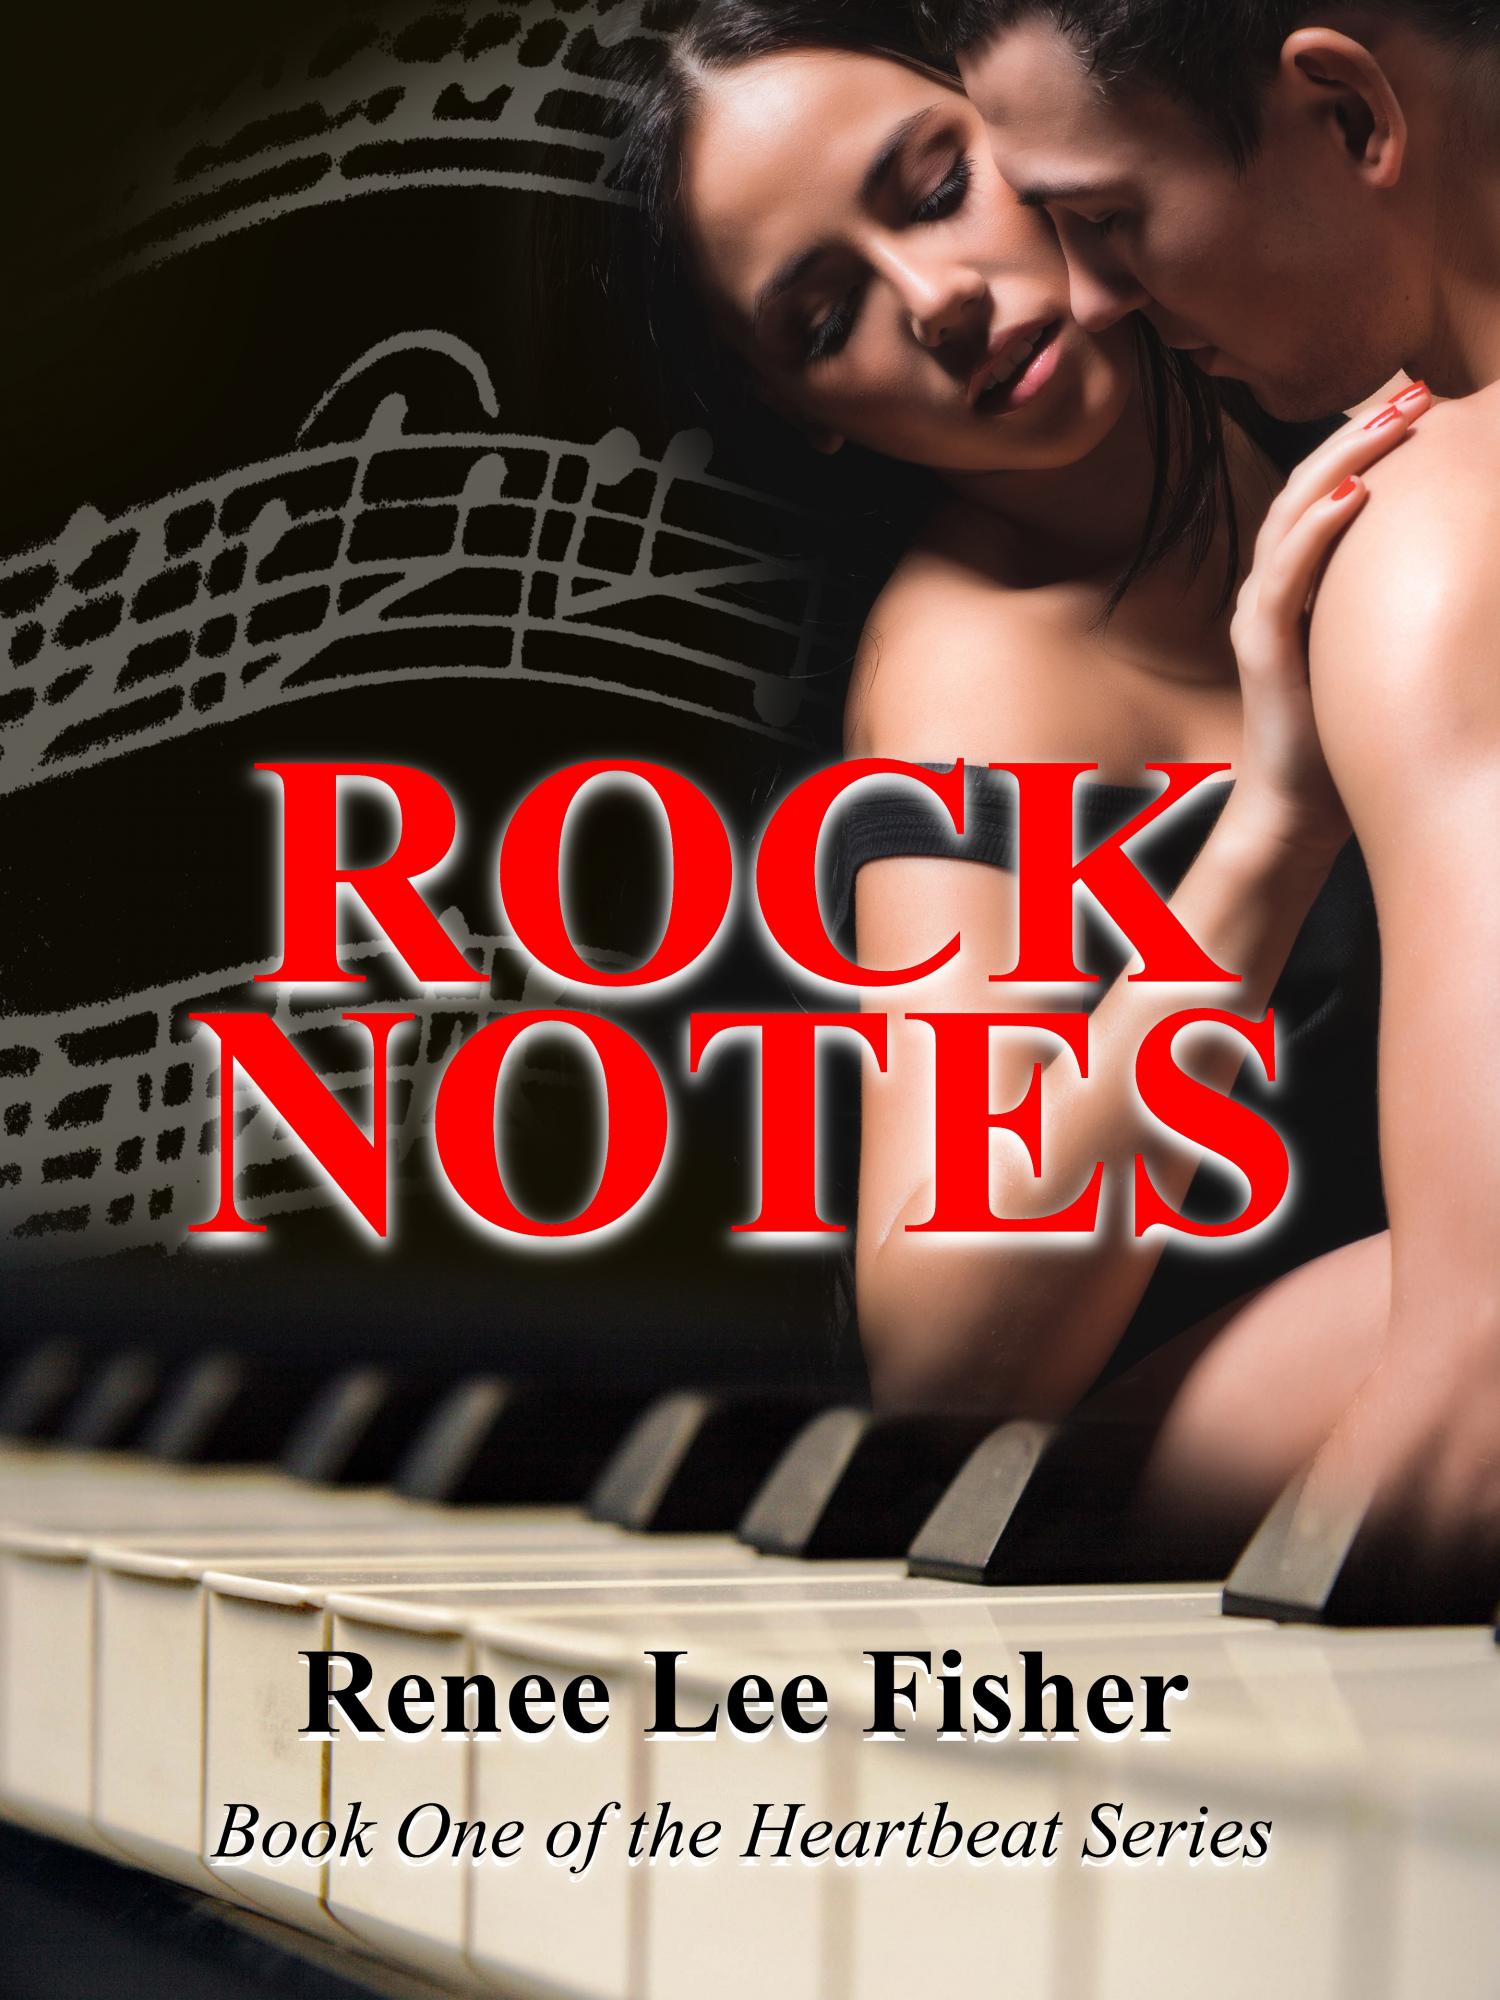 FREE: Rock Notes by Renee Lee Fisher